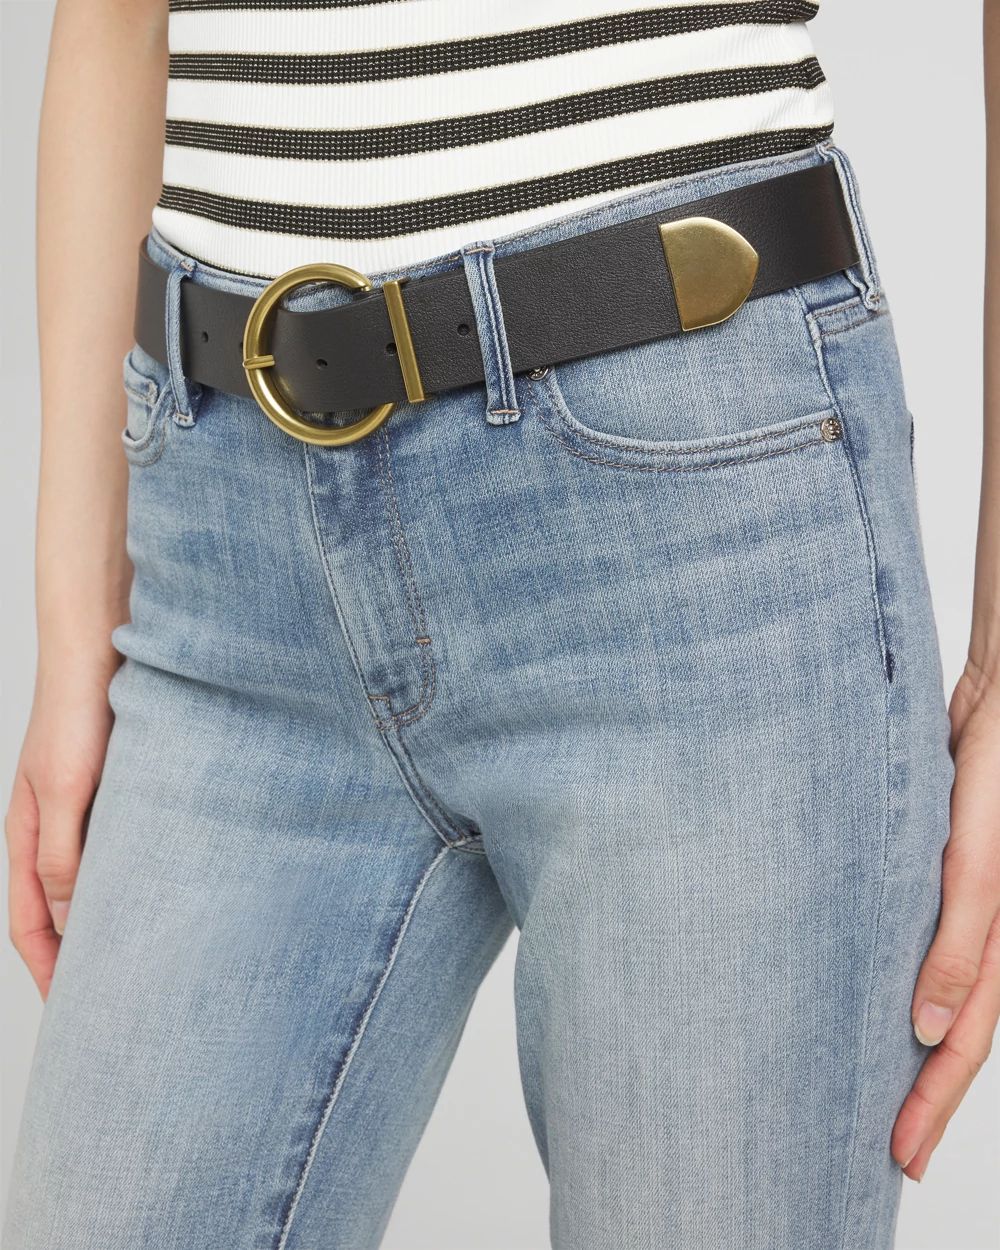 Round Capped Denim Belt click to view larger image.